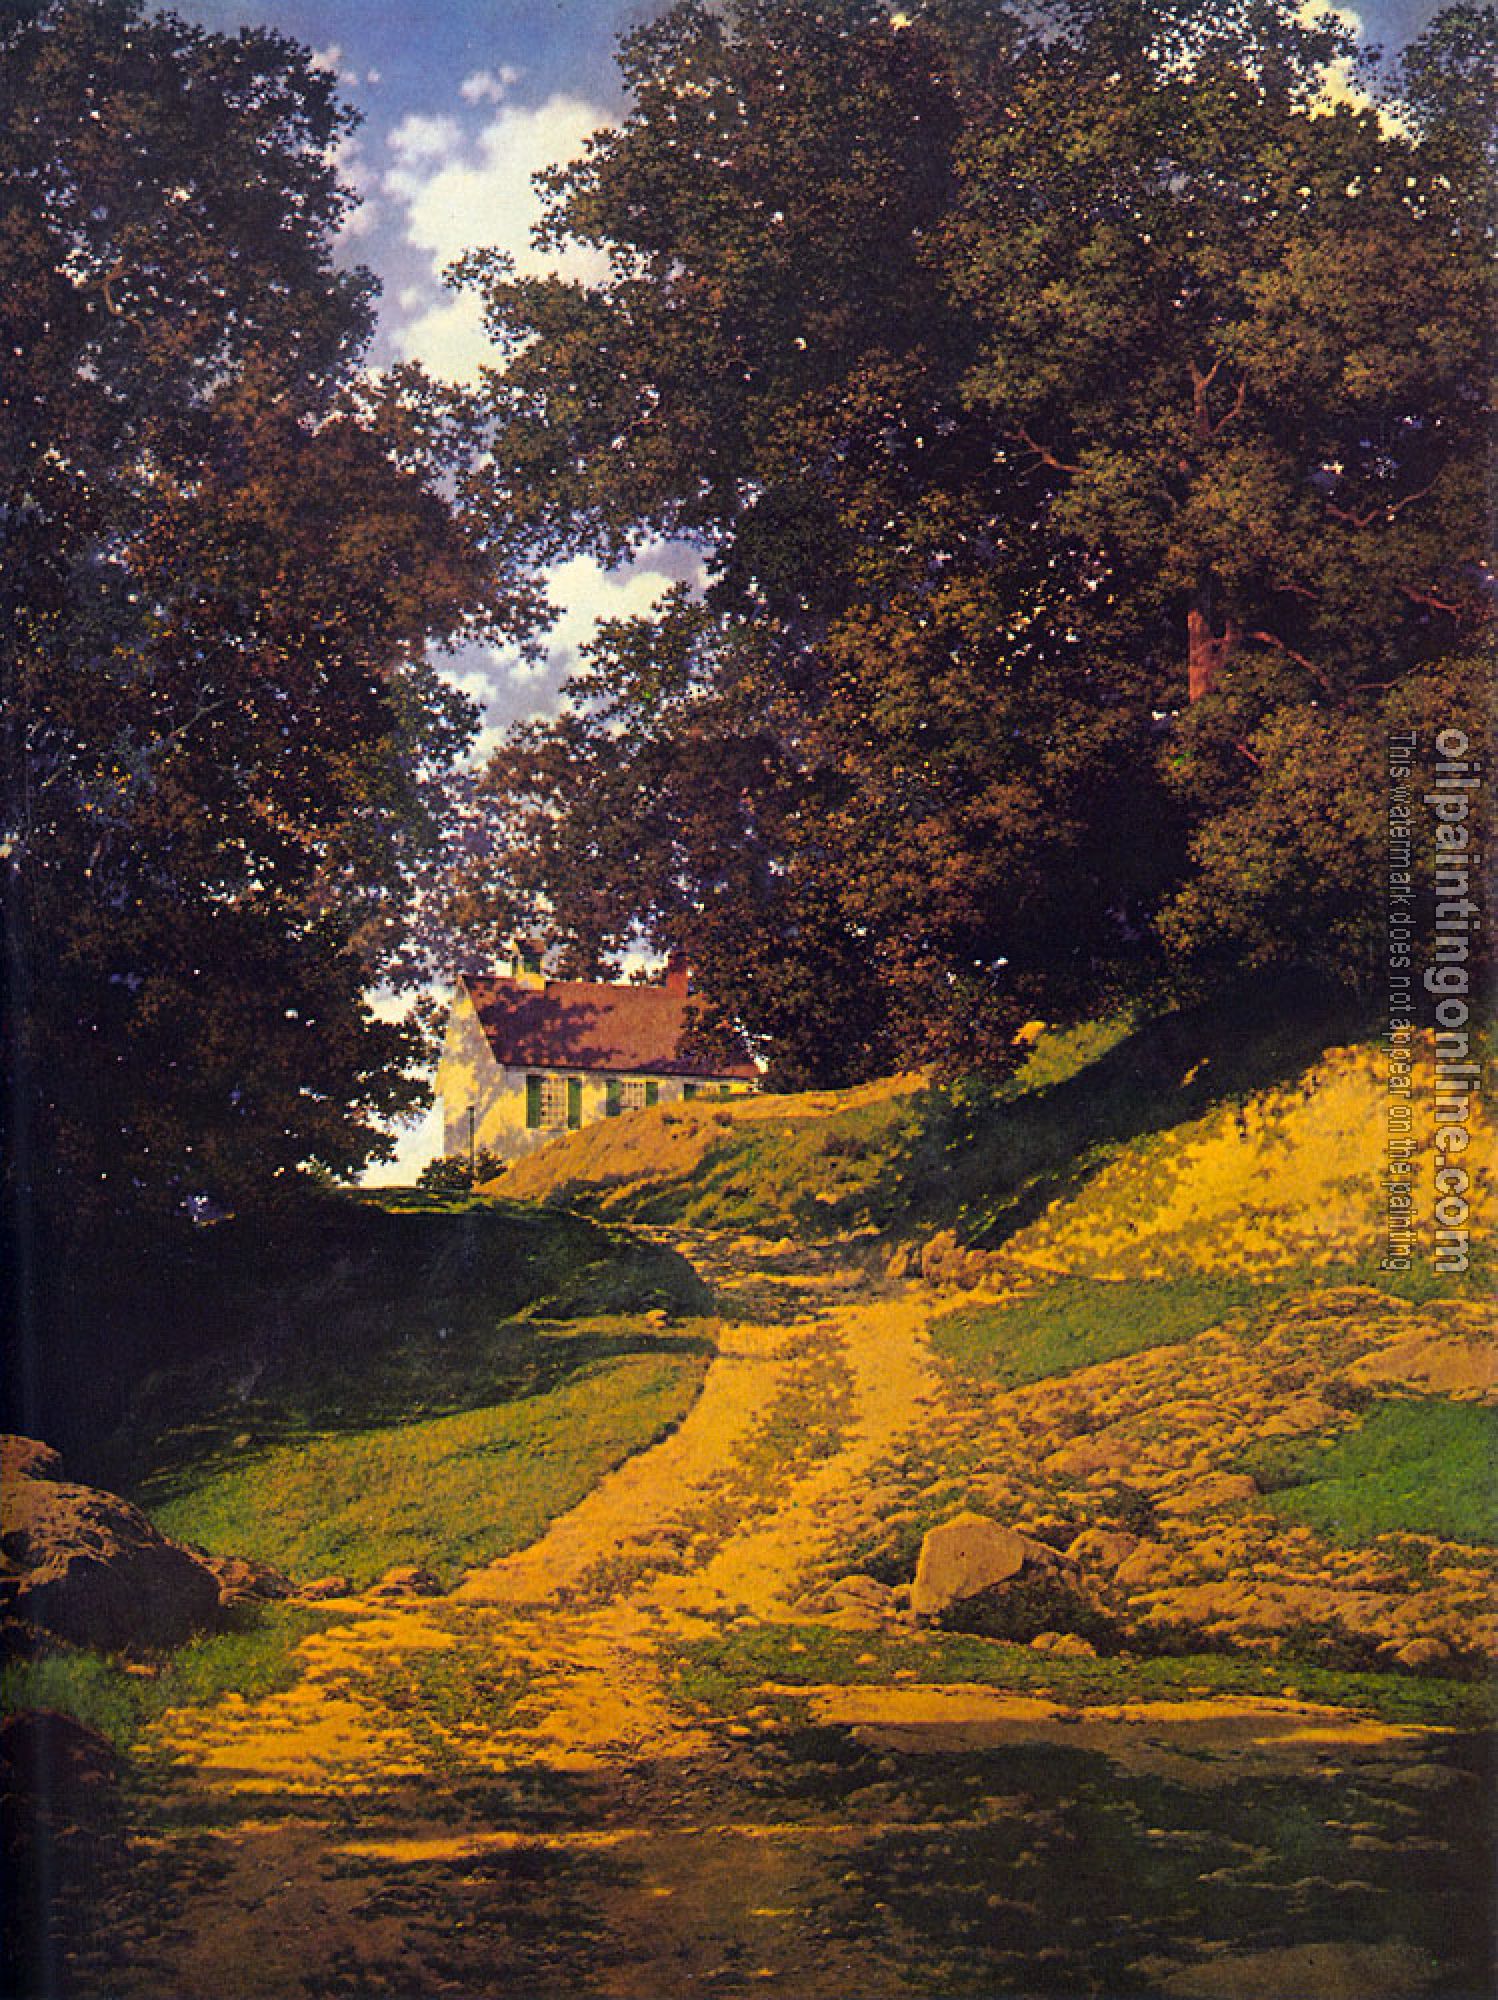 Parrish, Maxfield - The Country Schoolhouse